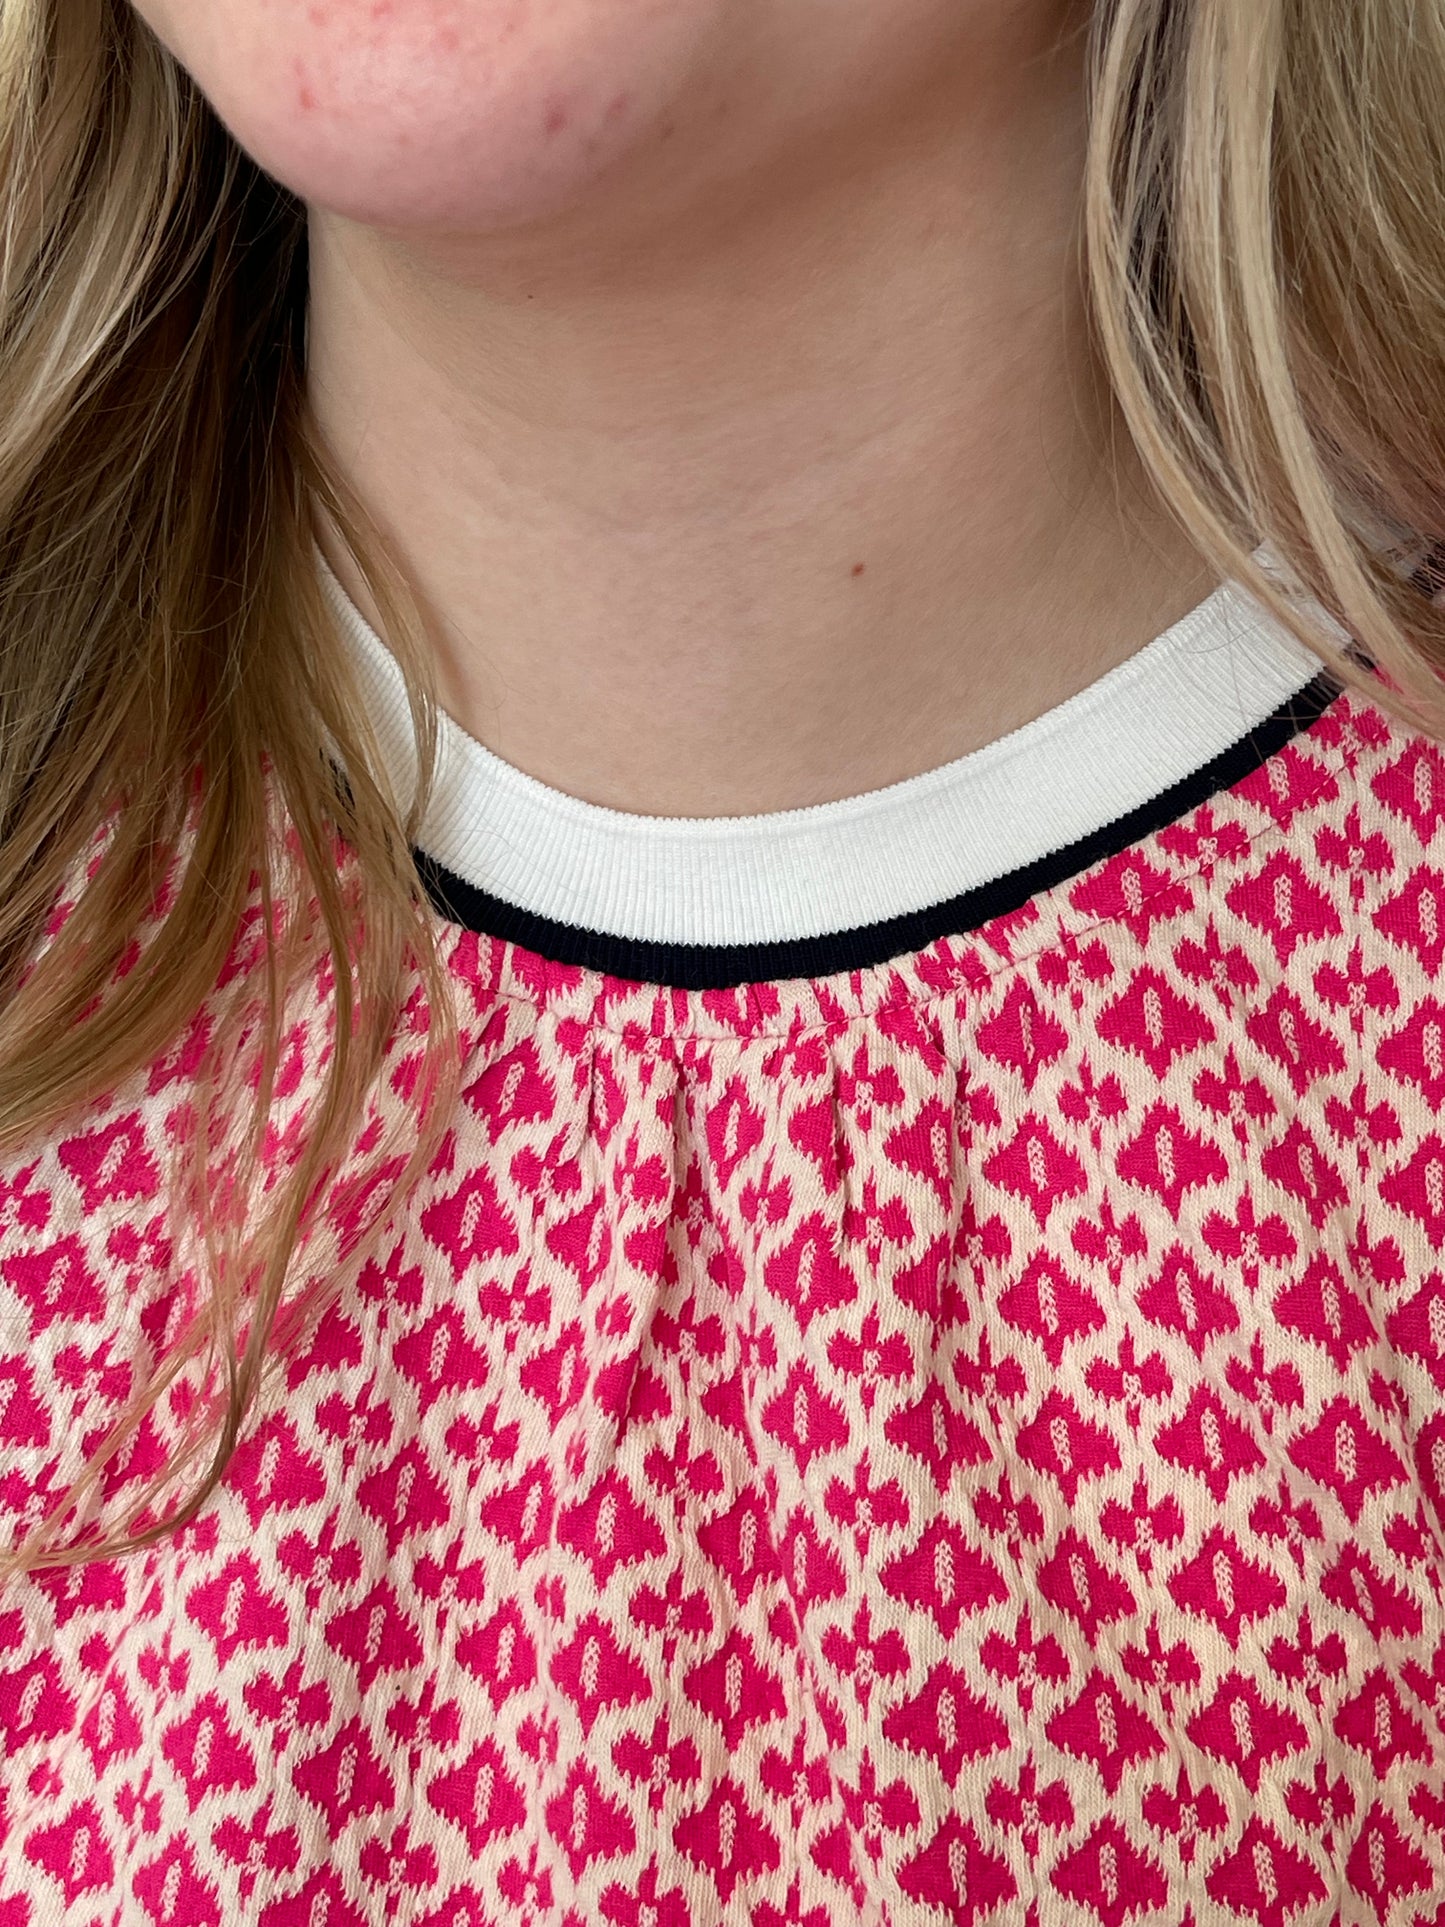 Pink Knit Patterned Top with White & Navy Striping